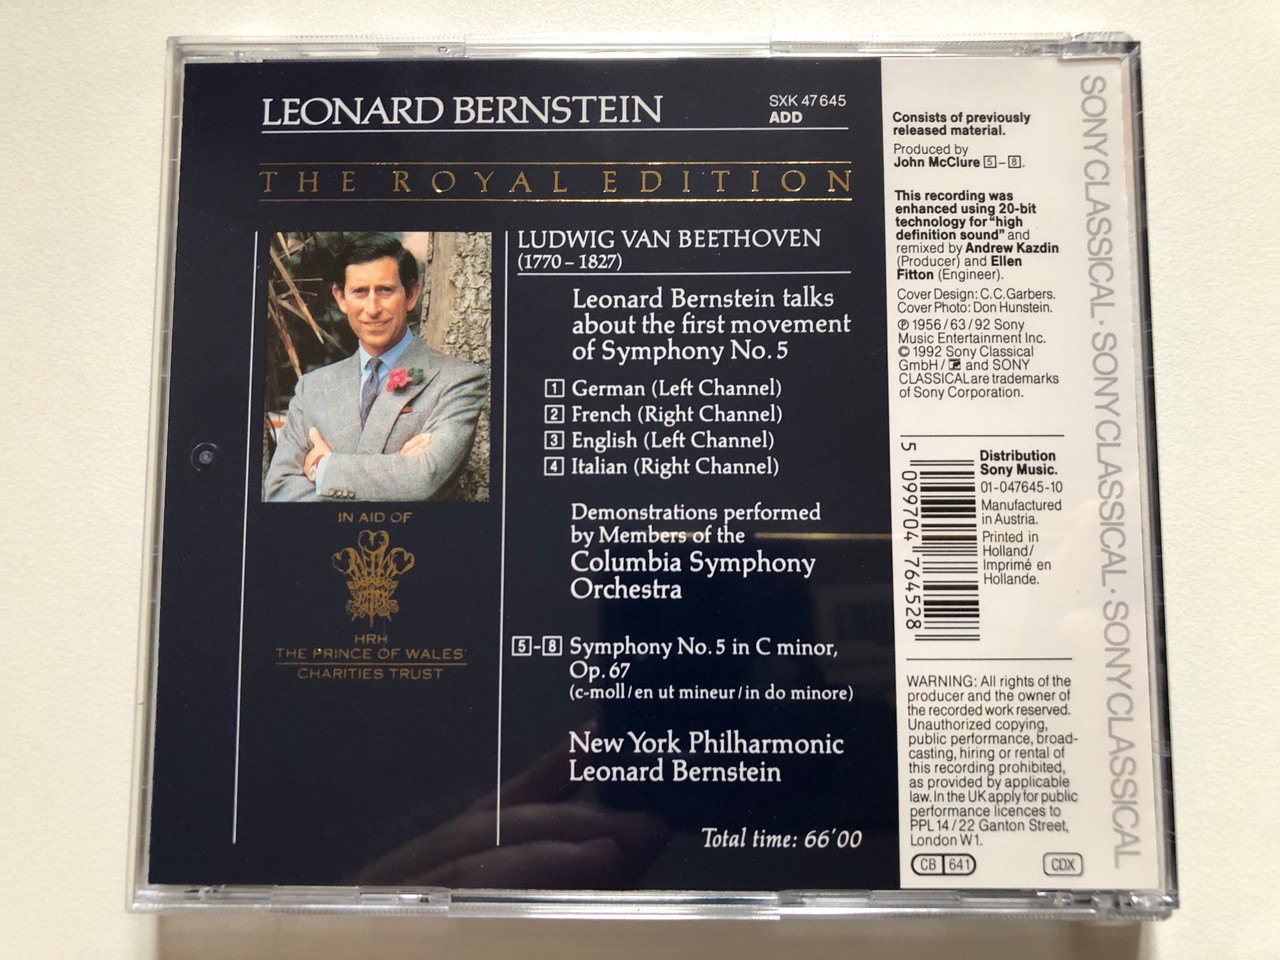 https://cdn10.bigcommerce.com/s-62bdpkt7pb/products/0/images/311012/Leonard_Bernstein_Conducts_Beethoven_Symphony_No._5_New_York_Philharmonic_Talks_About_How_A_Great_Symphony_Was_Written_The_Royal_Edition_Sony_Classical_Audio_CD_1992_SXK_47645_2__14219.1699467265.1280.1280.JPG?c=2